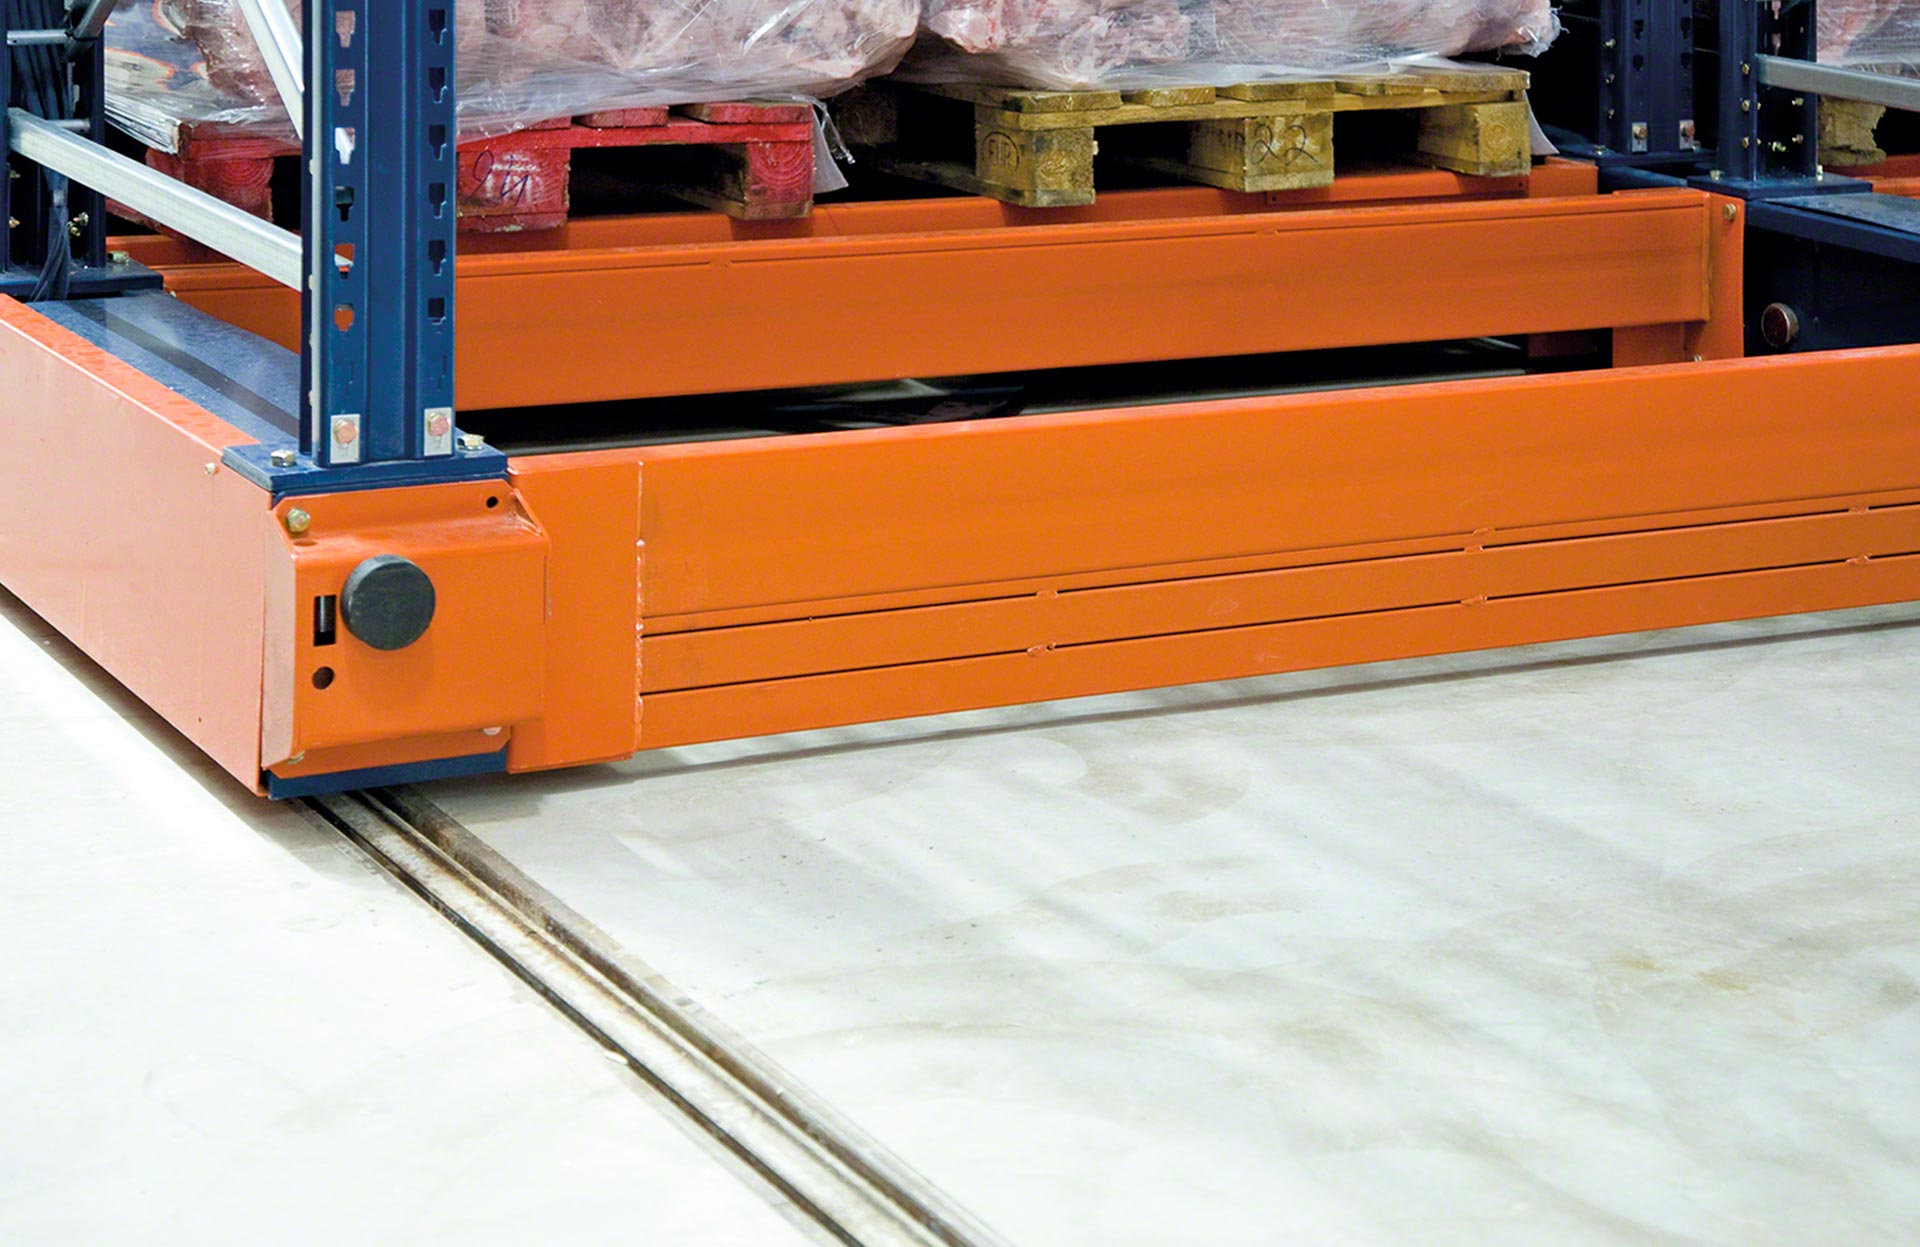 The racks are mounted on mobile bases that move along rails embedded in the floor